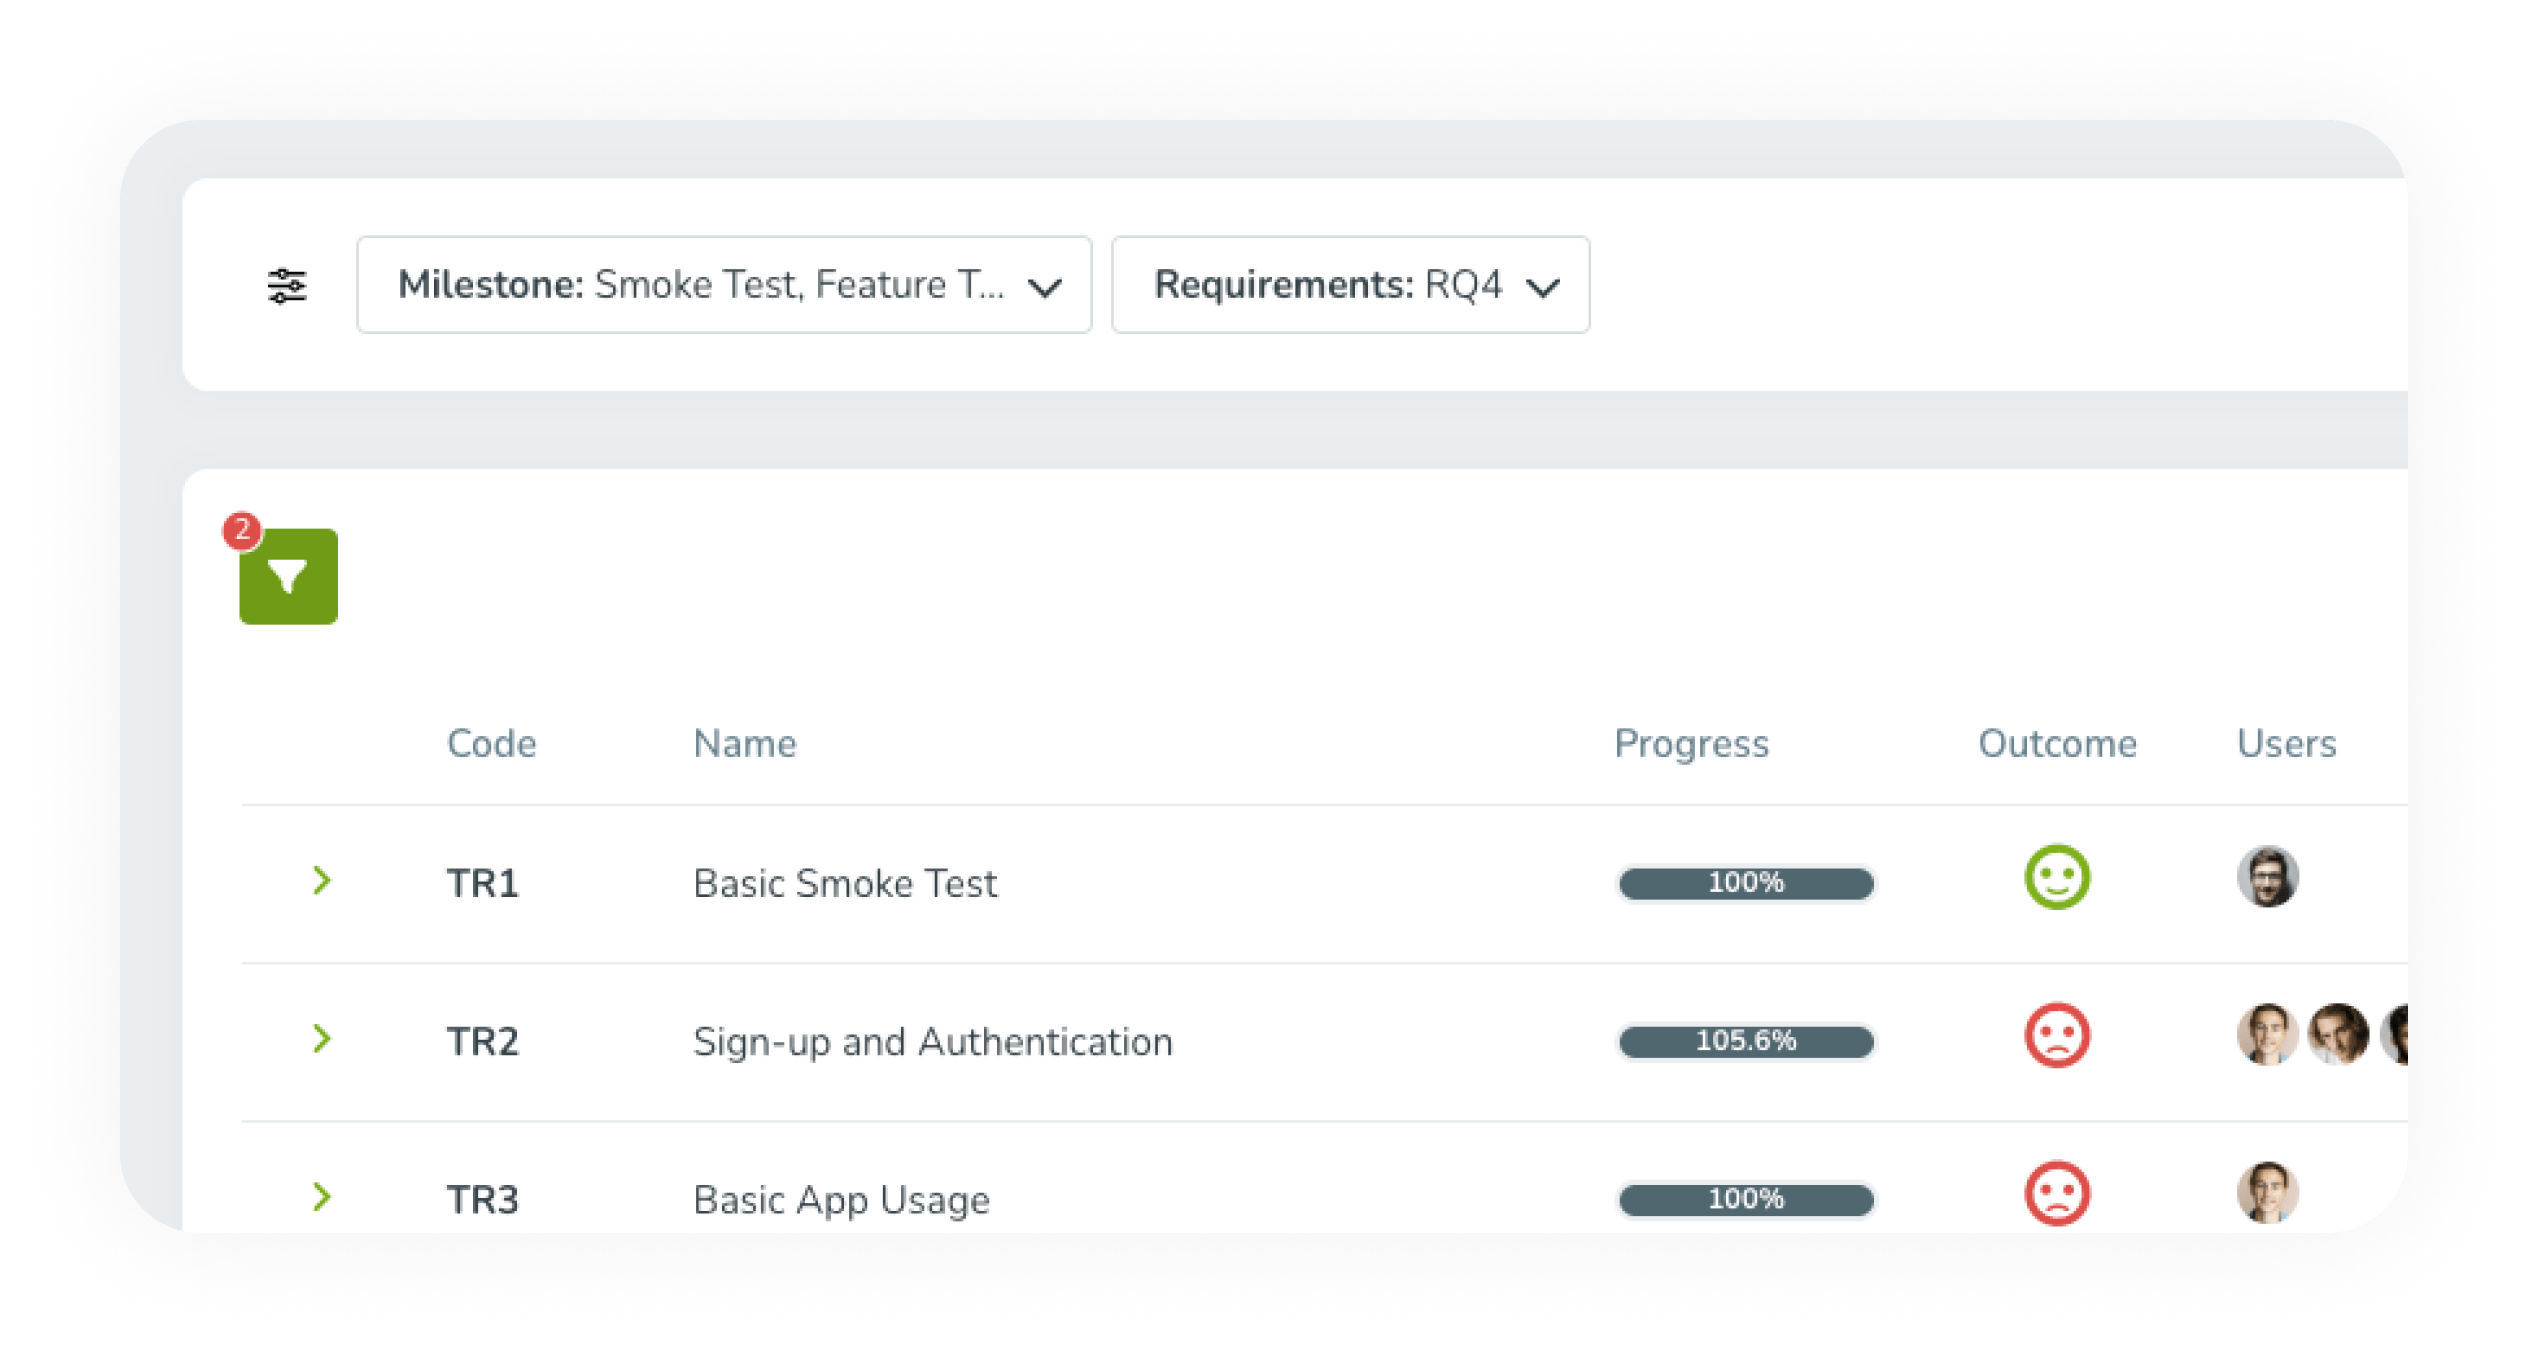 Use intuitive filters to organize and prioritize test runs